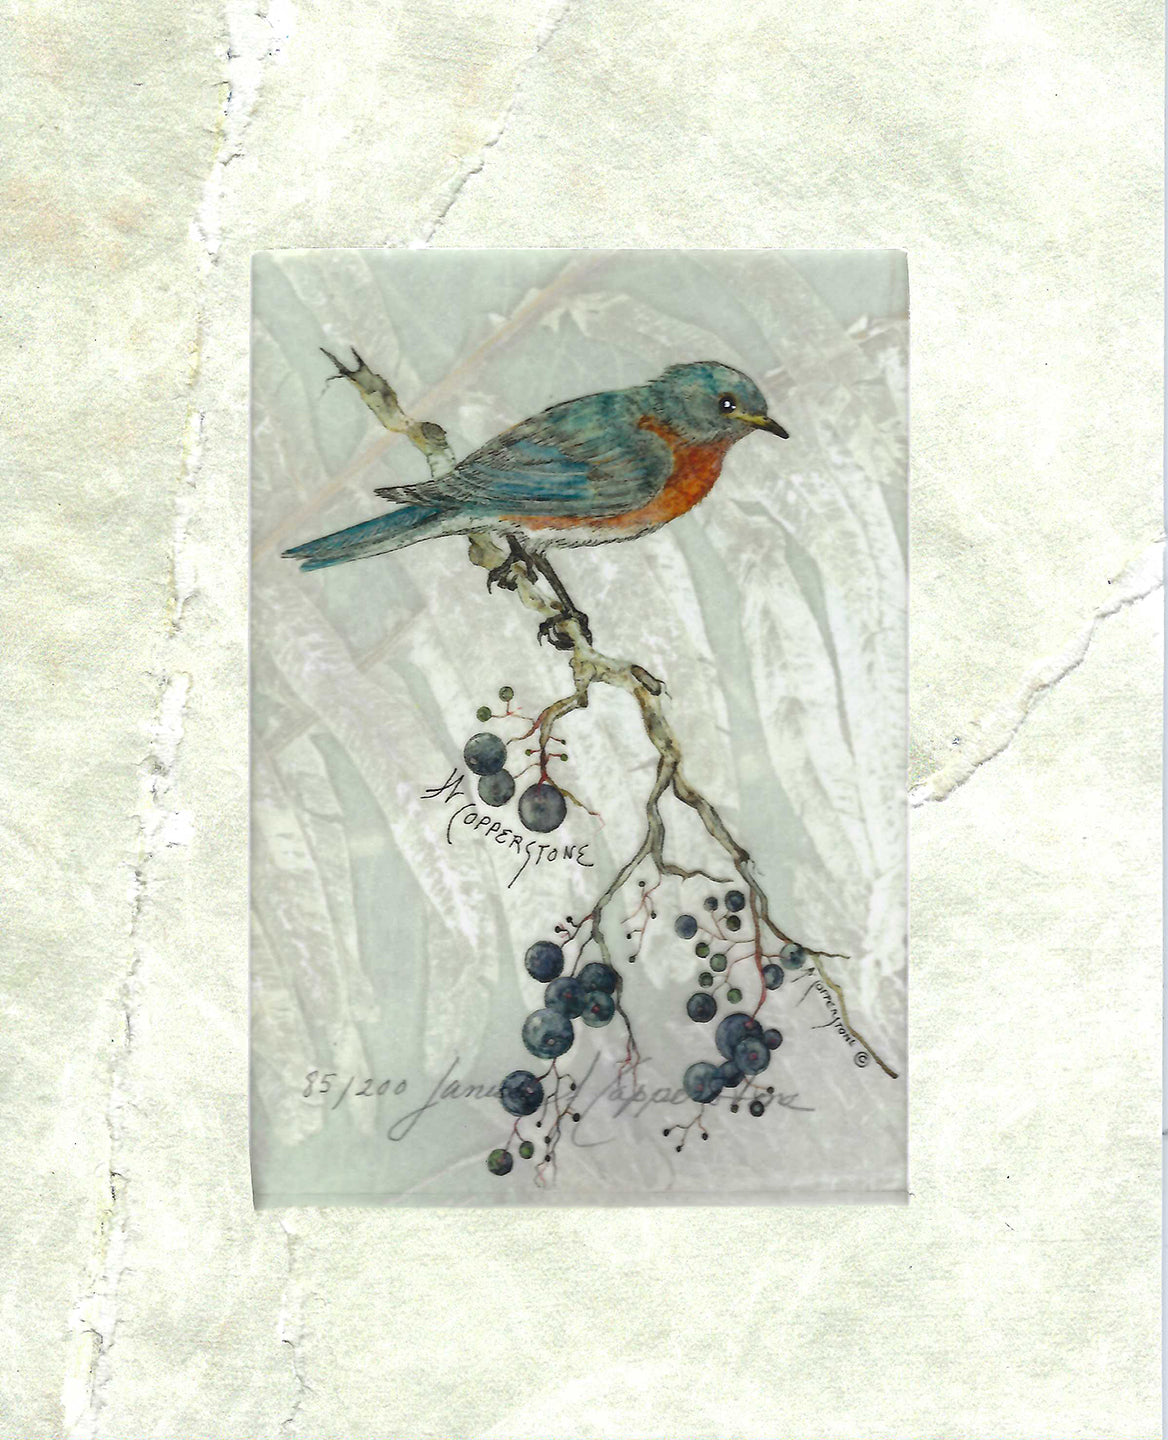 Bluebird mixed media art by Janice A. Copperstone.